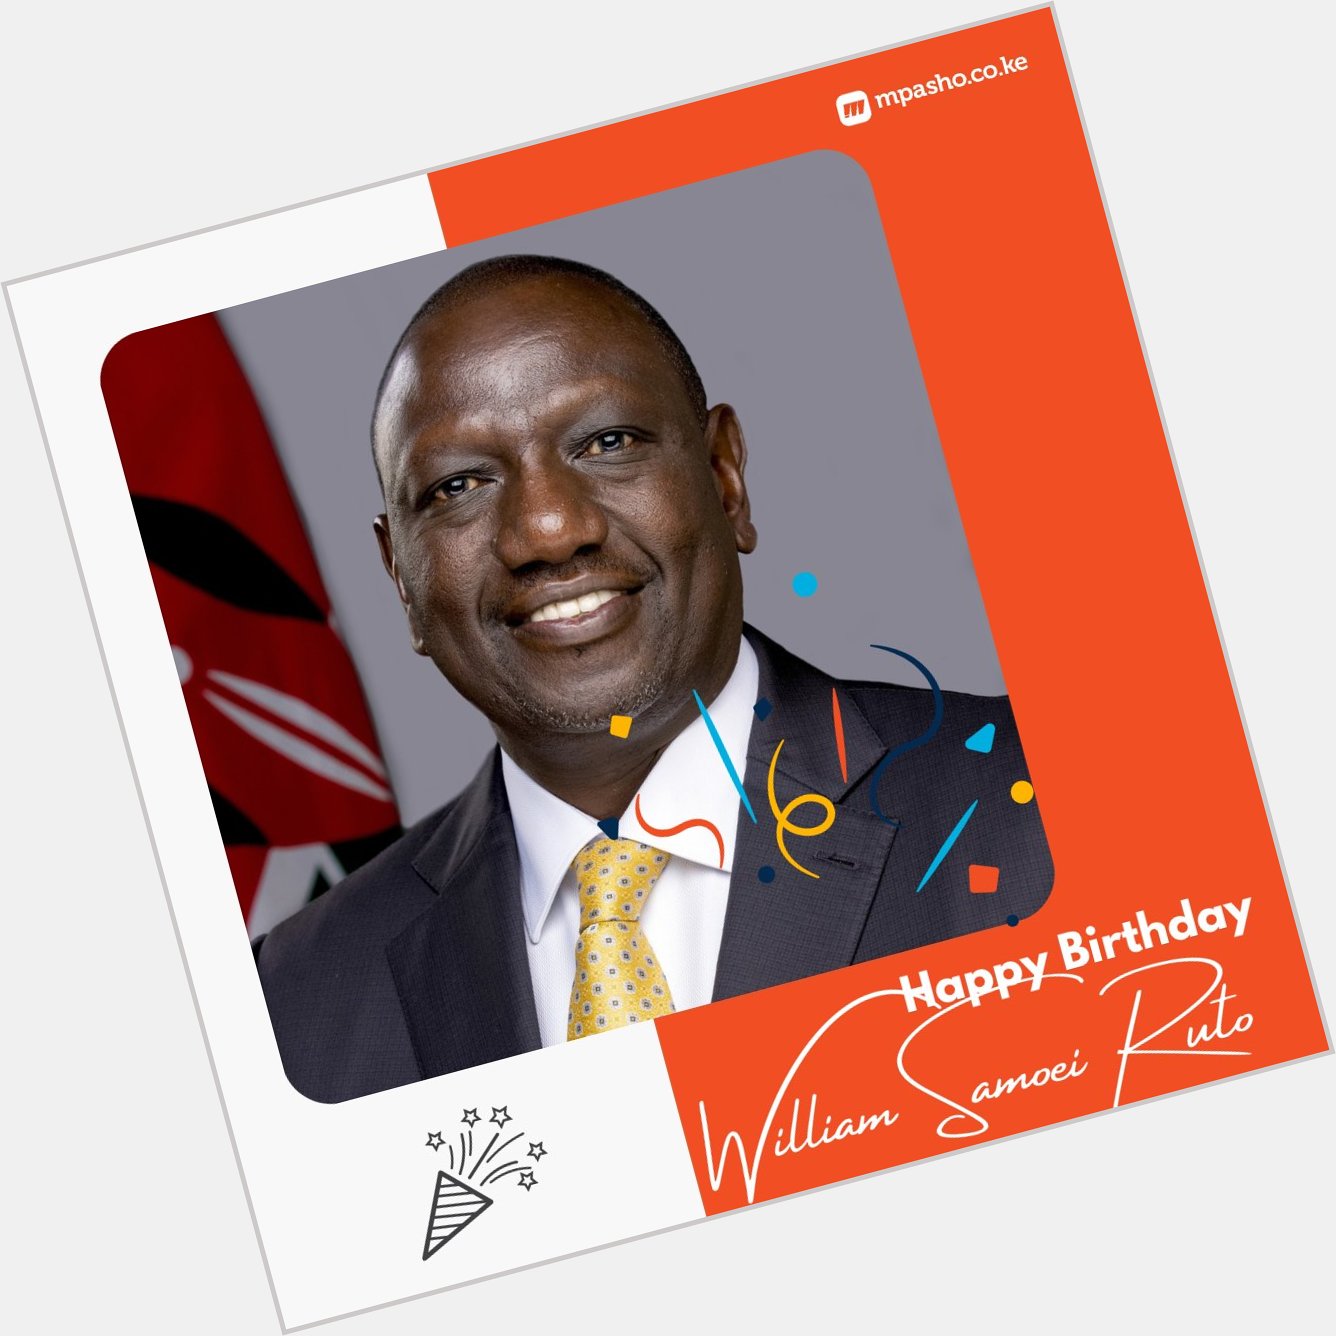 Happy birthday and best wishes to our President William Ruto.  God bless you, God bless Kenya   